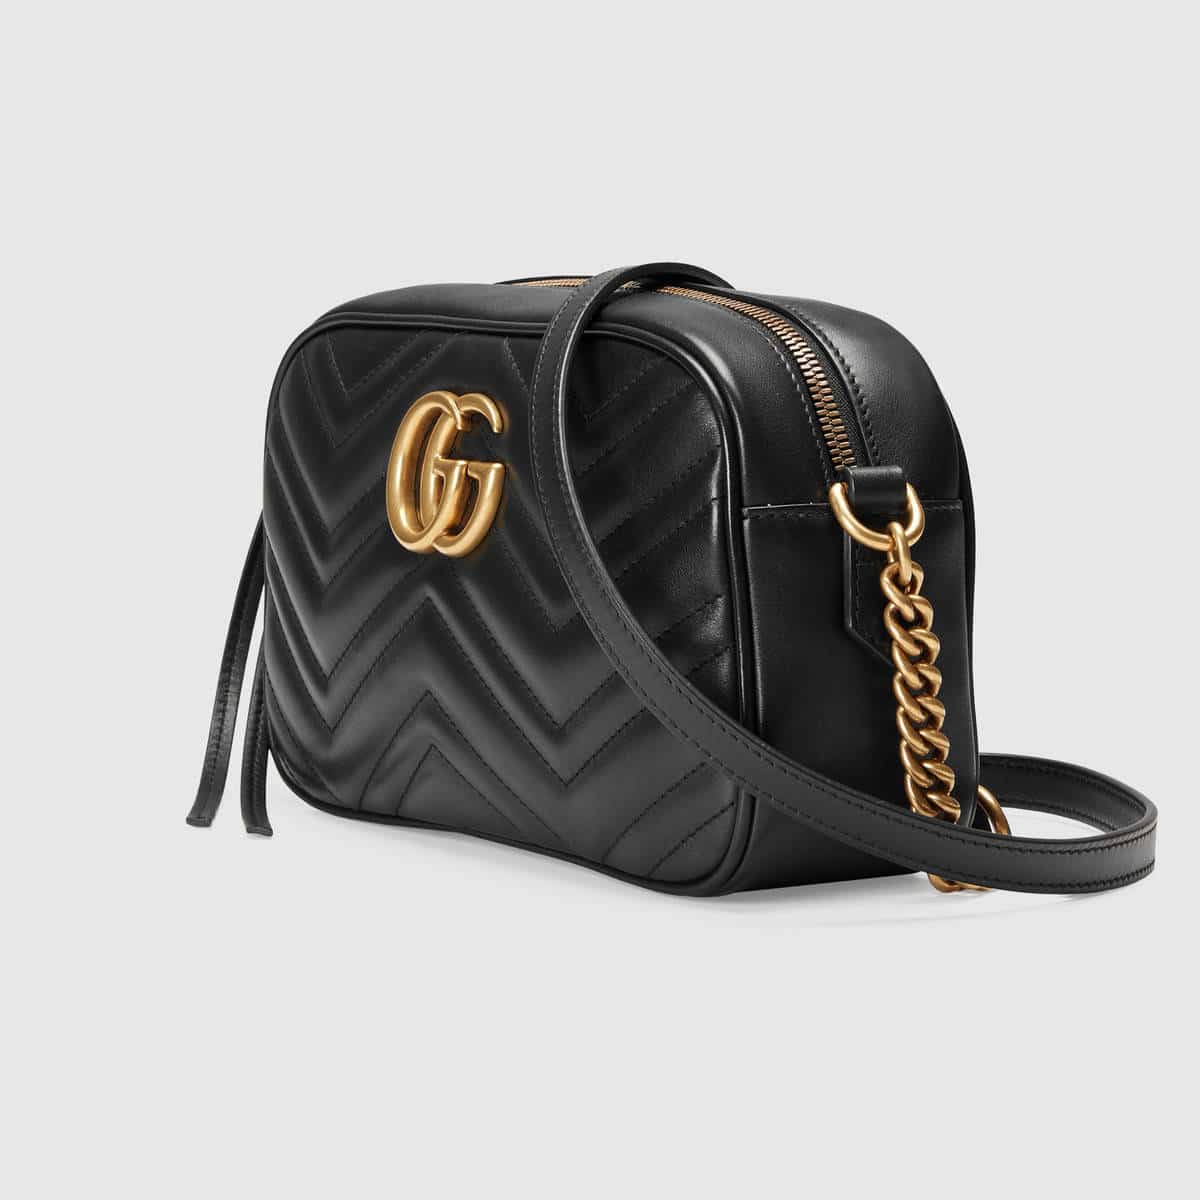 gucci marmont camera bag sizes